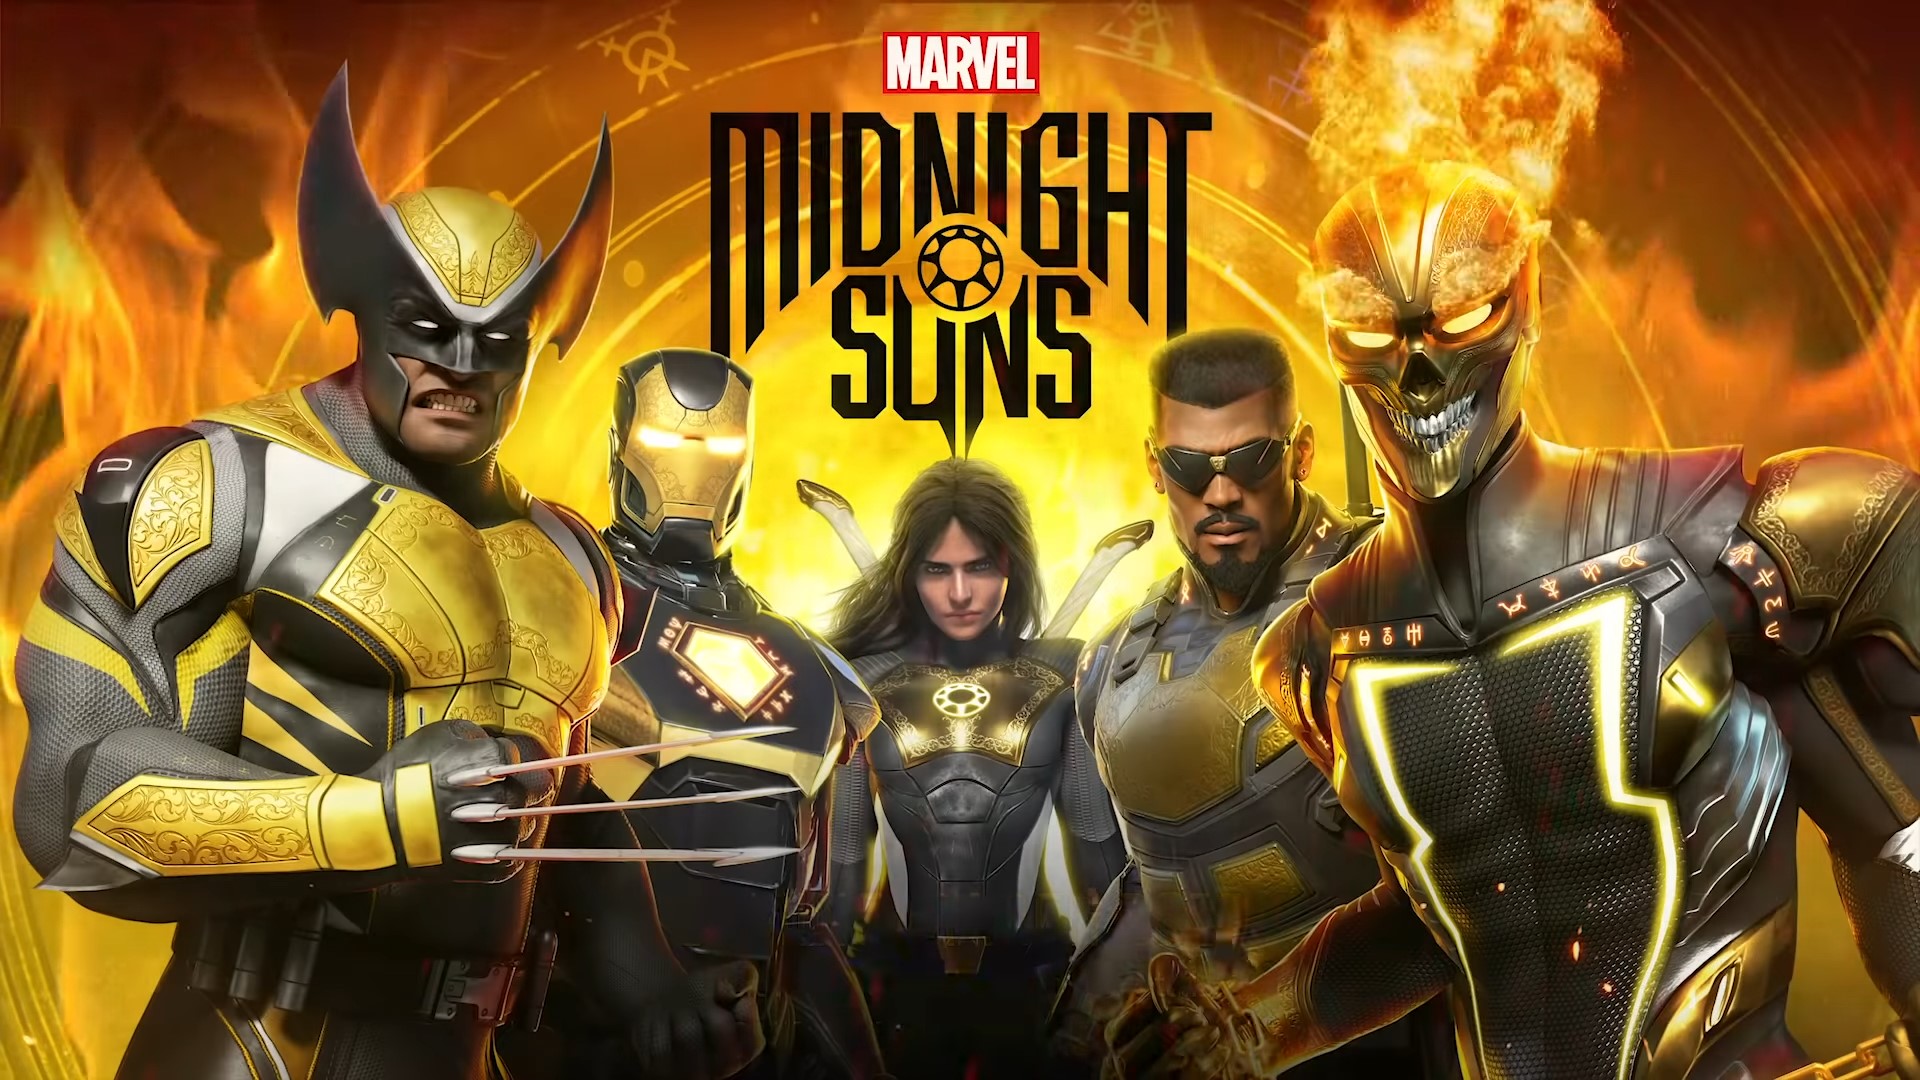 Marvels Midnight Suns Review - Disappointing 